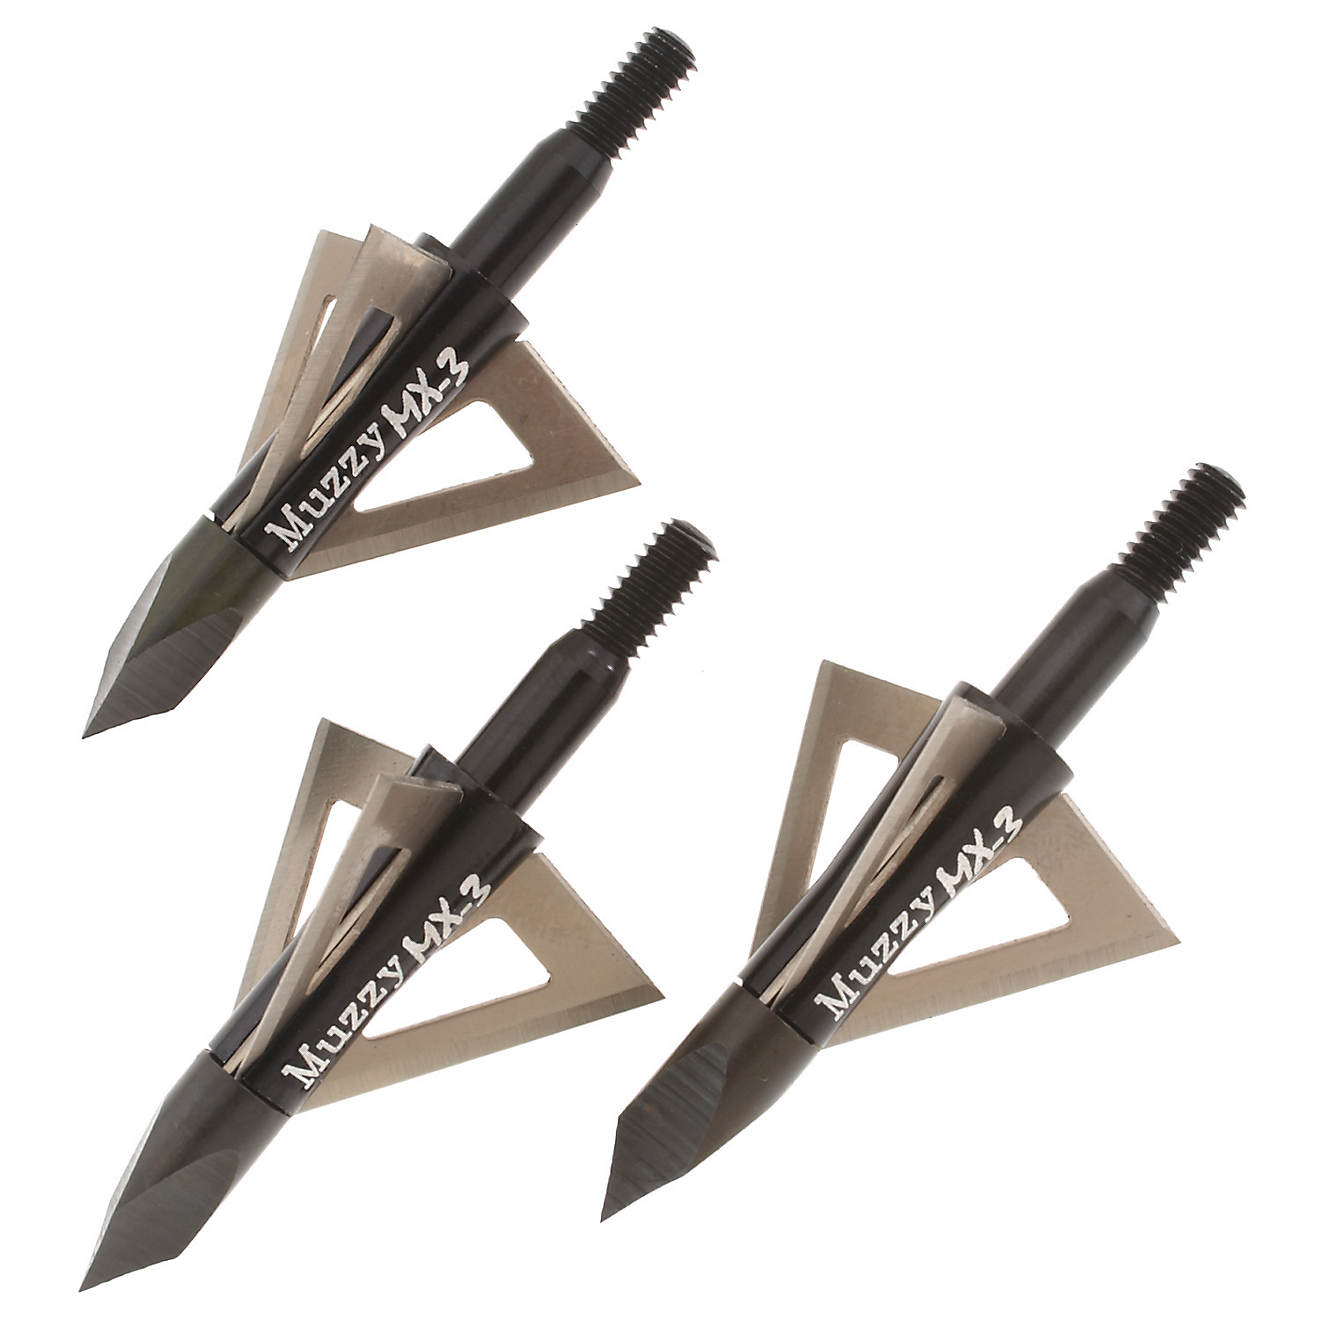 Archery Bowhunting Muzzy Broadheads Mx-3 Replacement Blades 100 Grain for sale online 